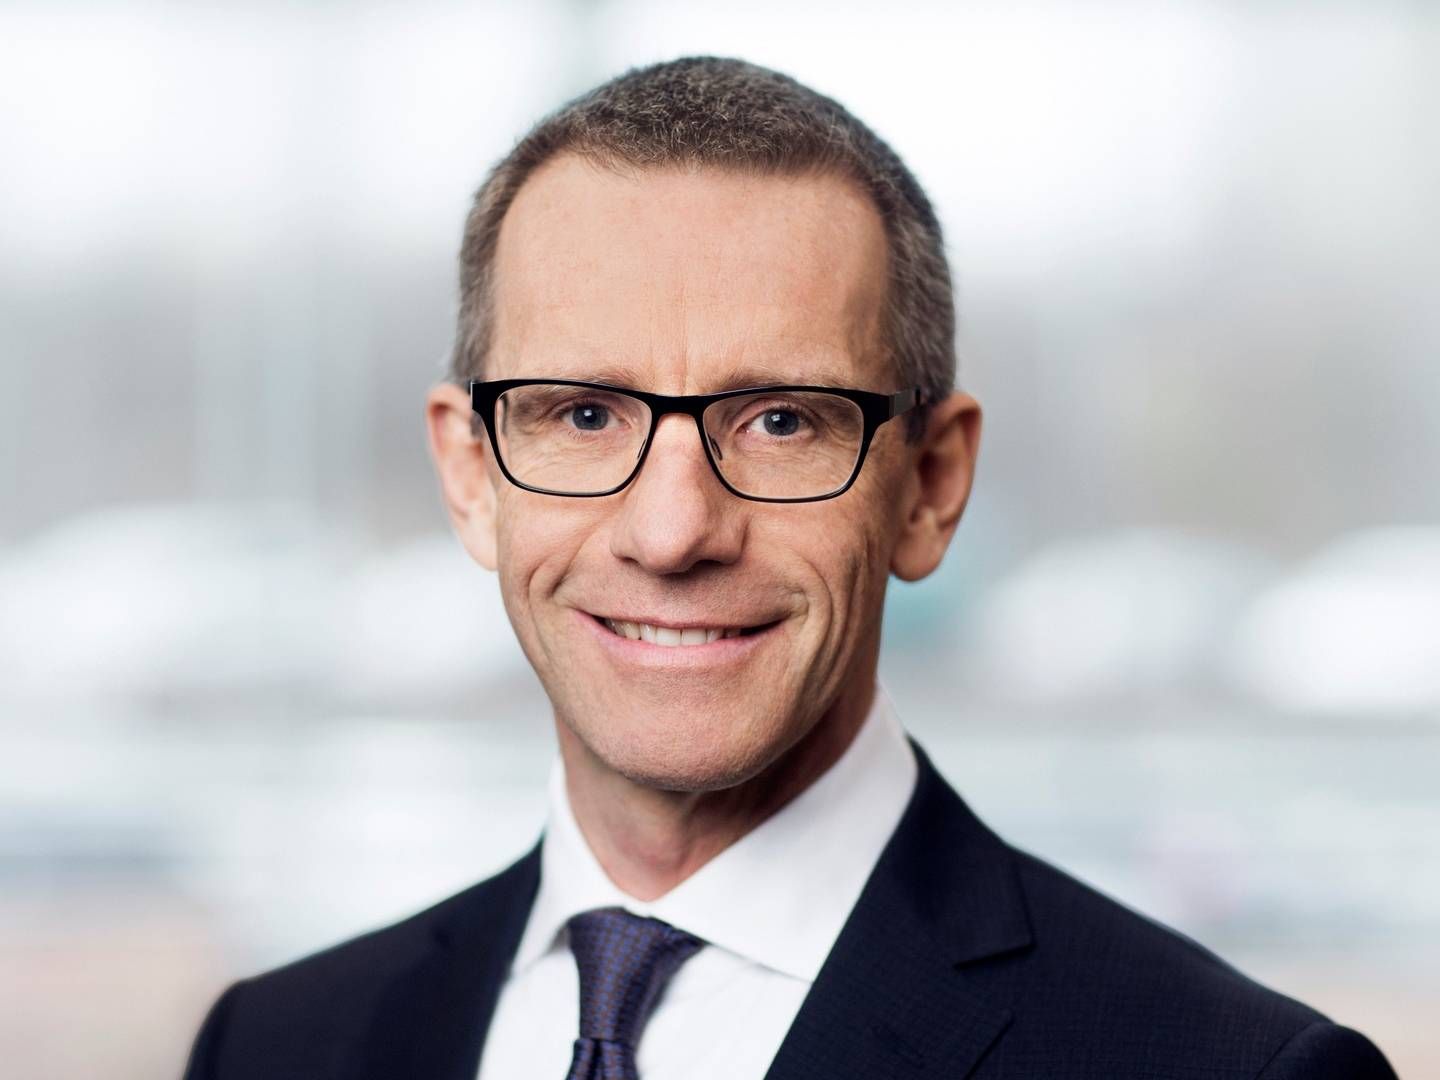 Christian Hyldahl, Managing Director and Head of Continental Europe at BlackRock, says that his and BlackRock. | Photo: PR/Blackrock